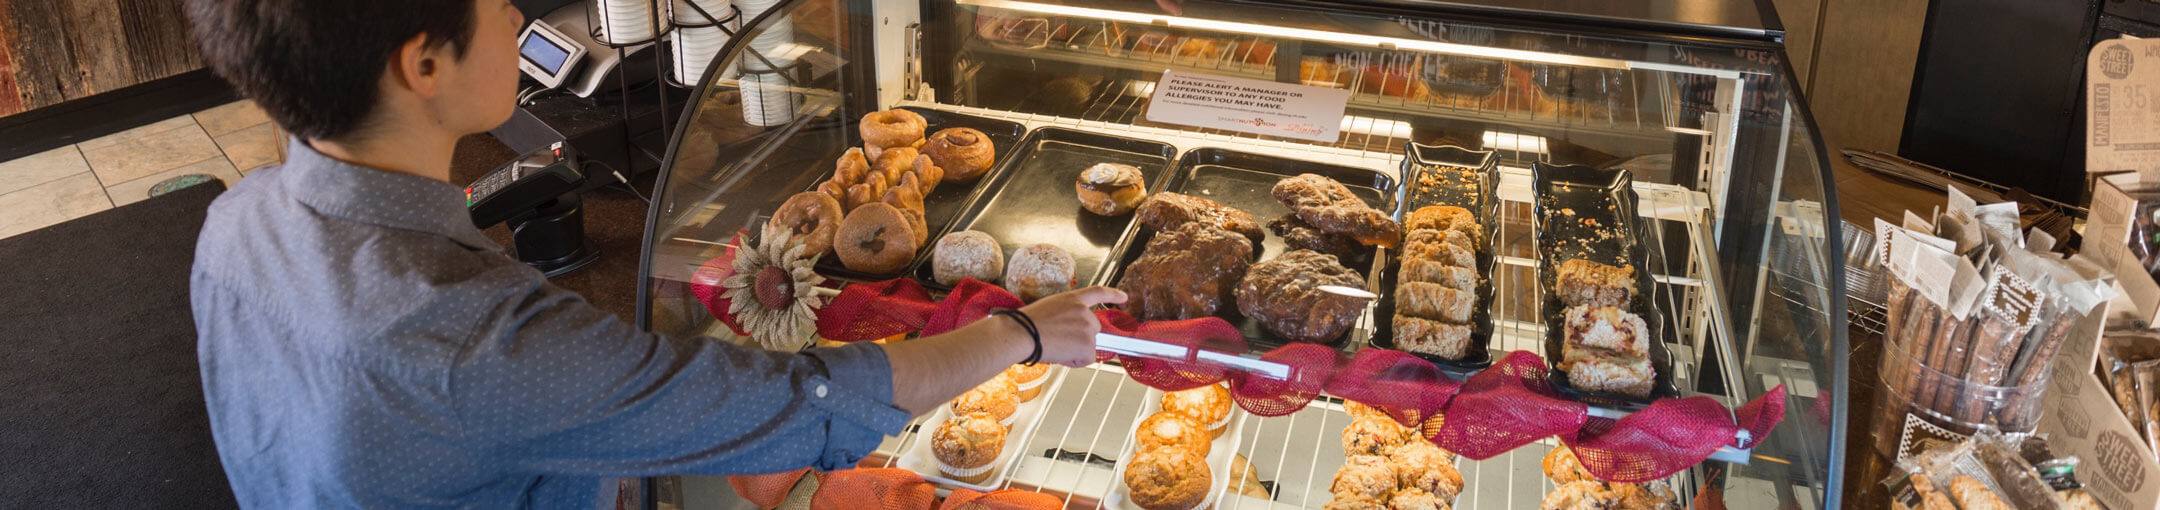 A person pointing to a baked good in a display case at the Artesano Bakery and Cafe.